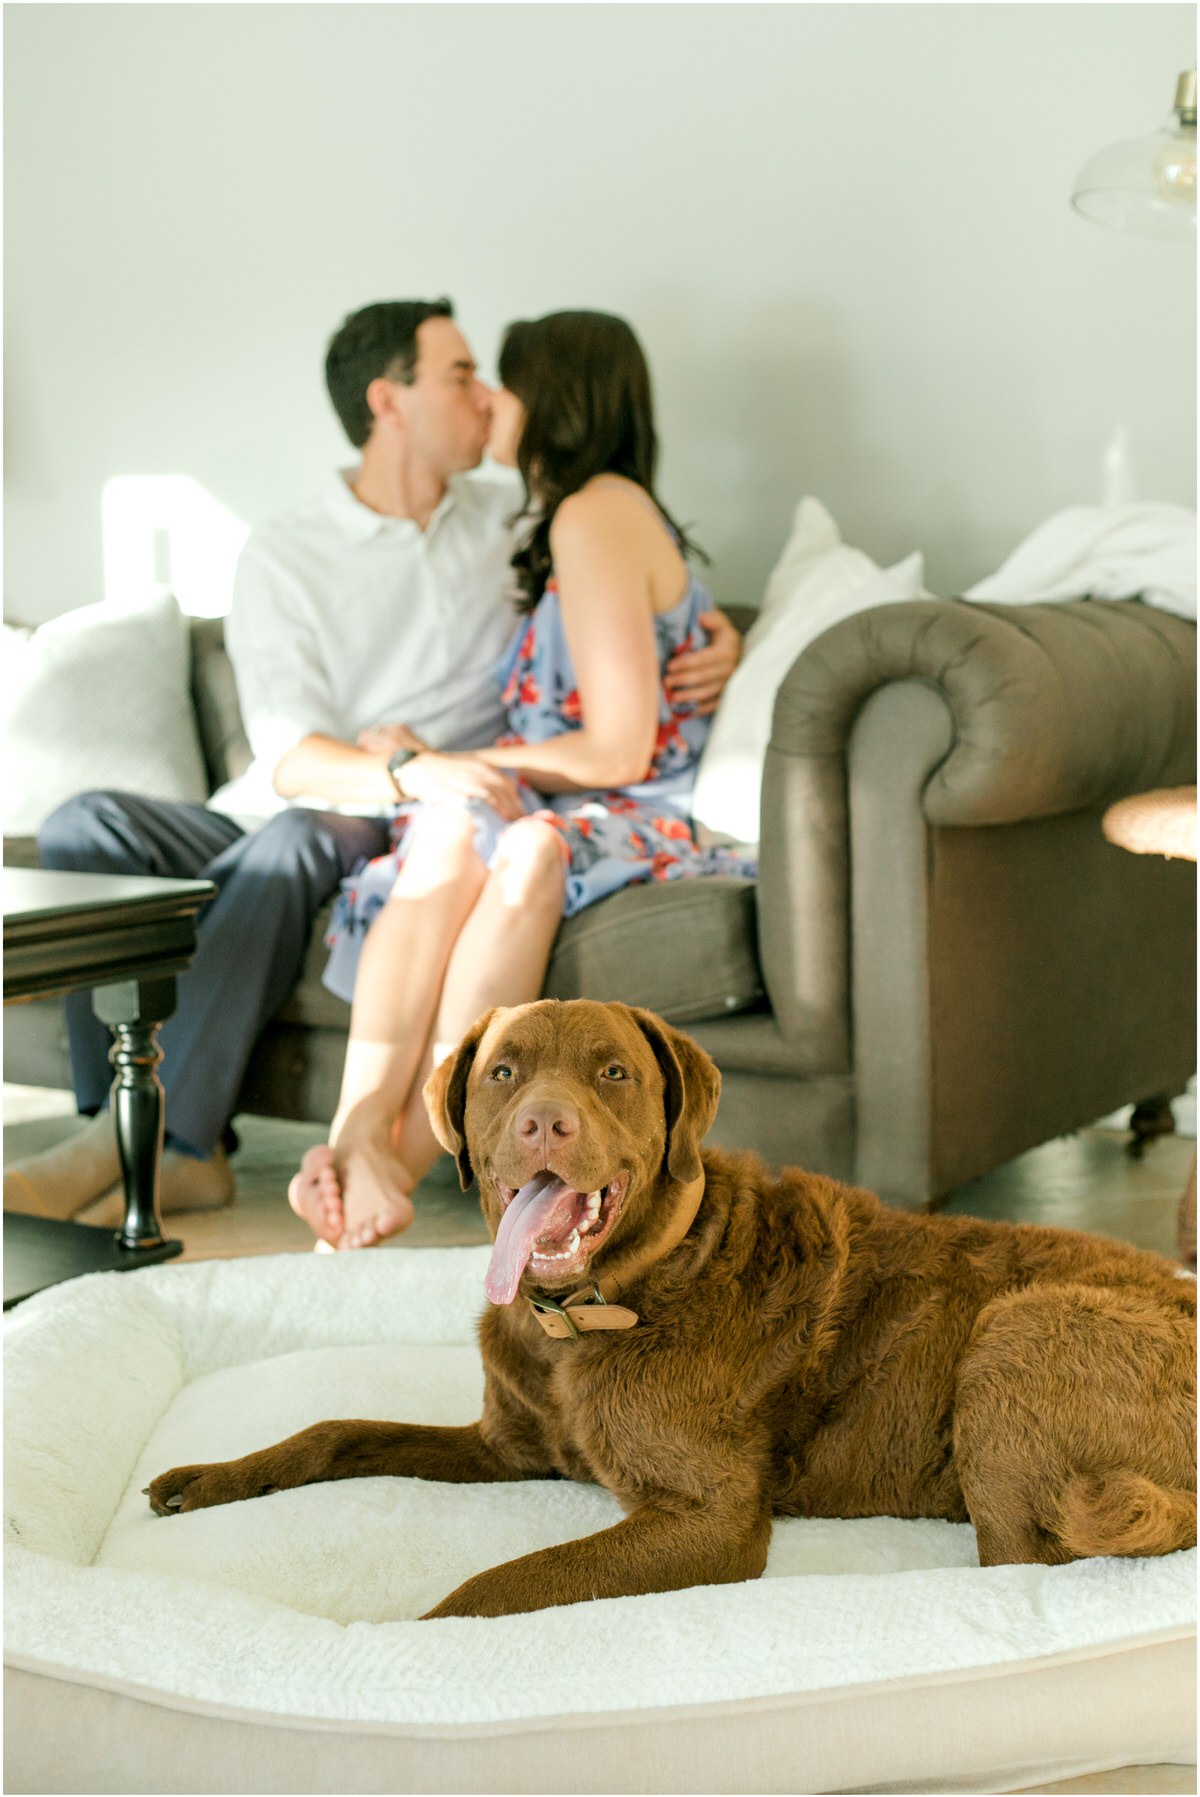 guy and girl kissing on the couple with their dog on the floor next to them